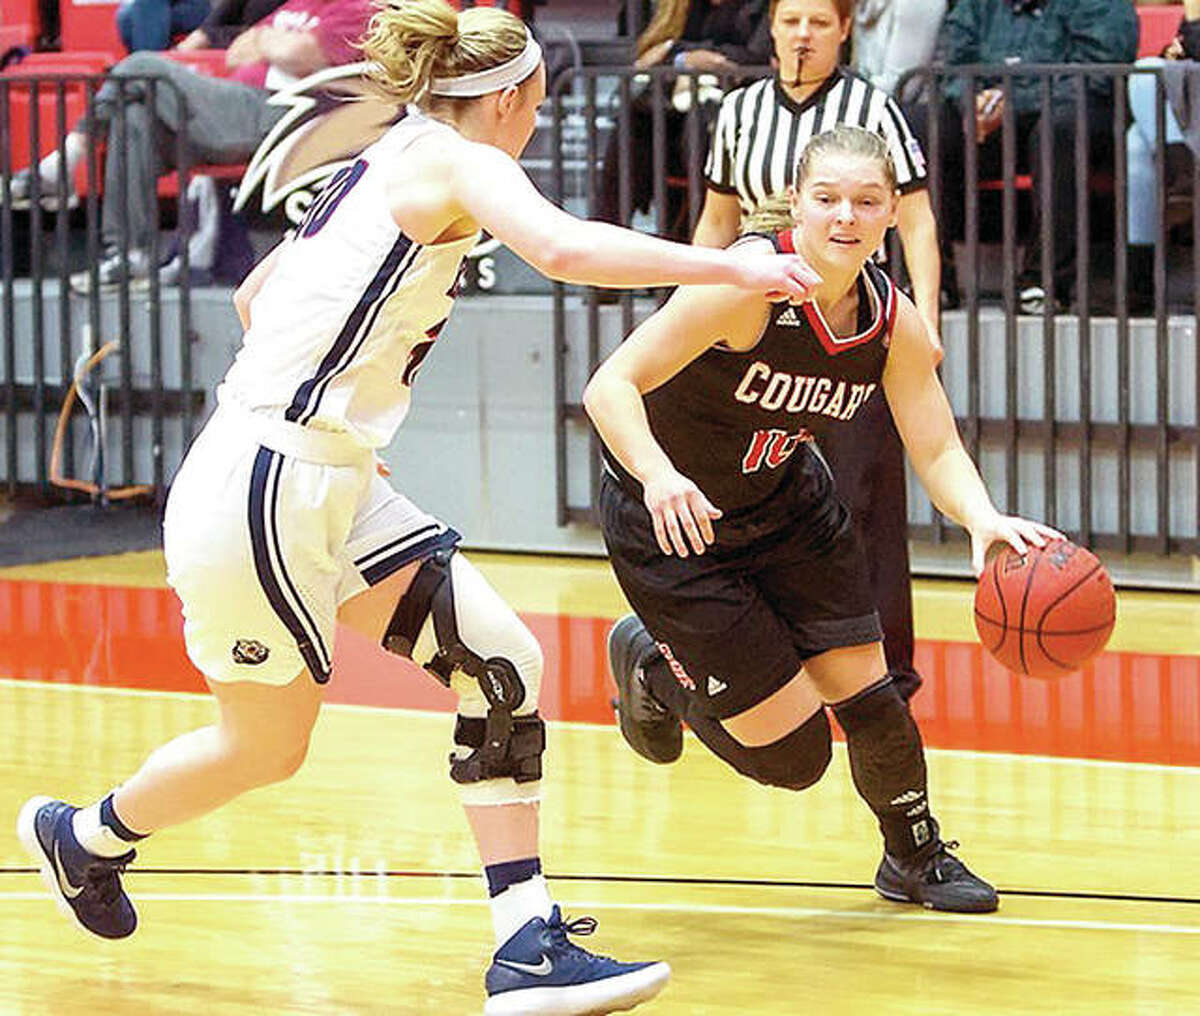 SIUE’s Elina Berzina, right, scored a career-high 12 points in her team’s 86-64 loss to Belmont College Saturday in Nashville, Tenn.